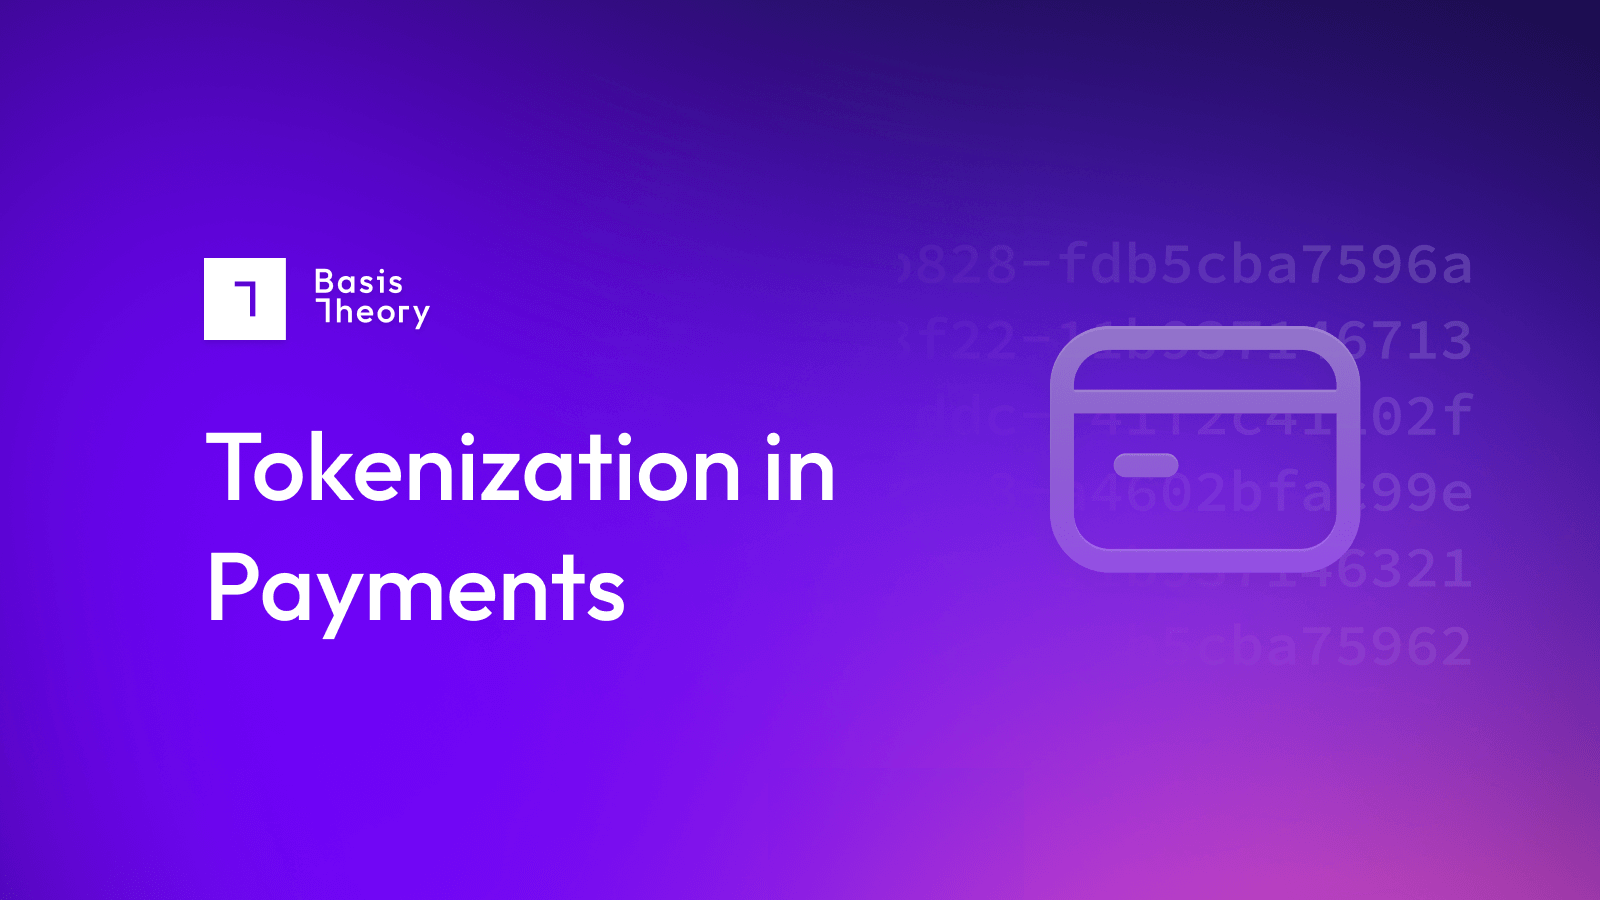 Tokenization in Payments